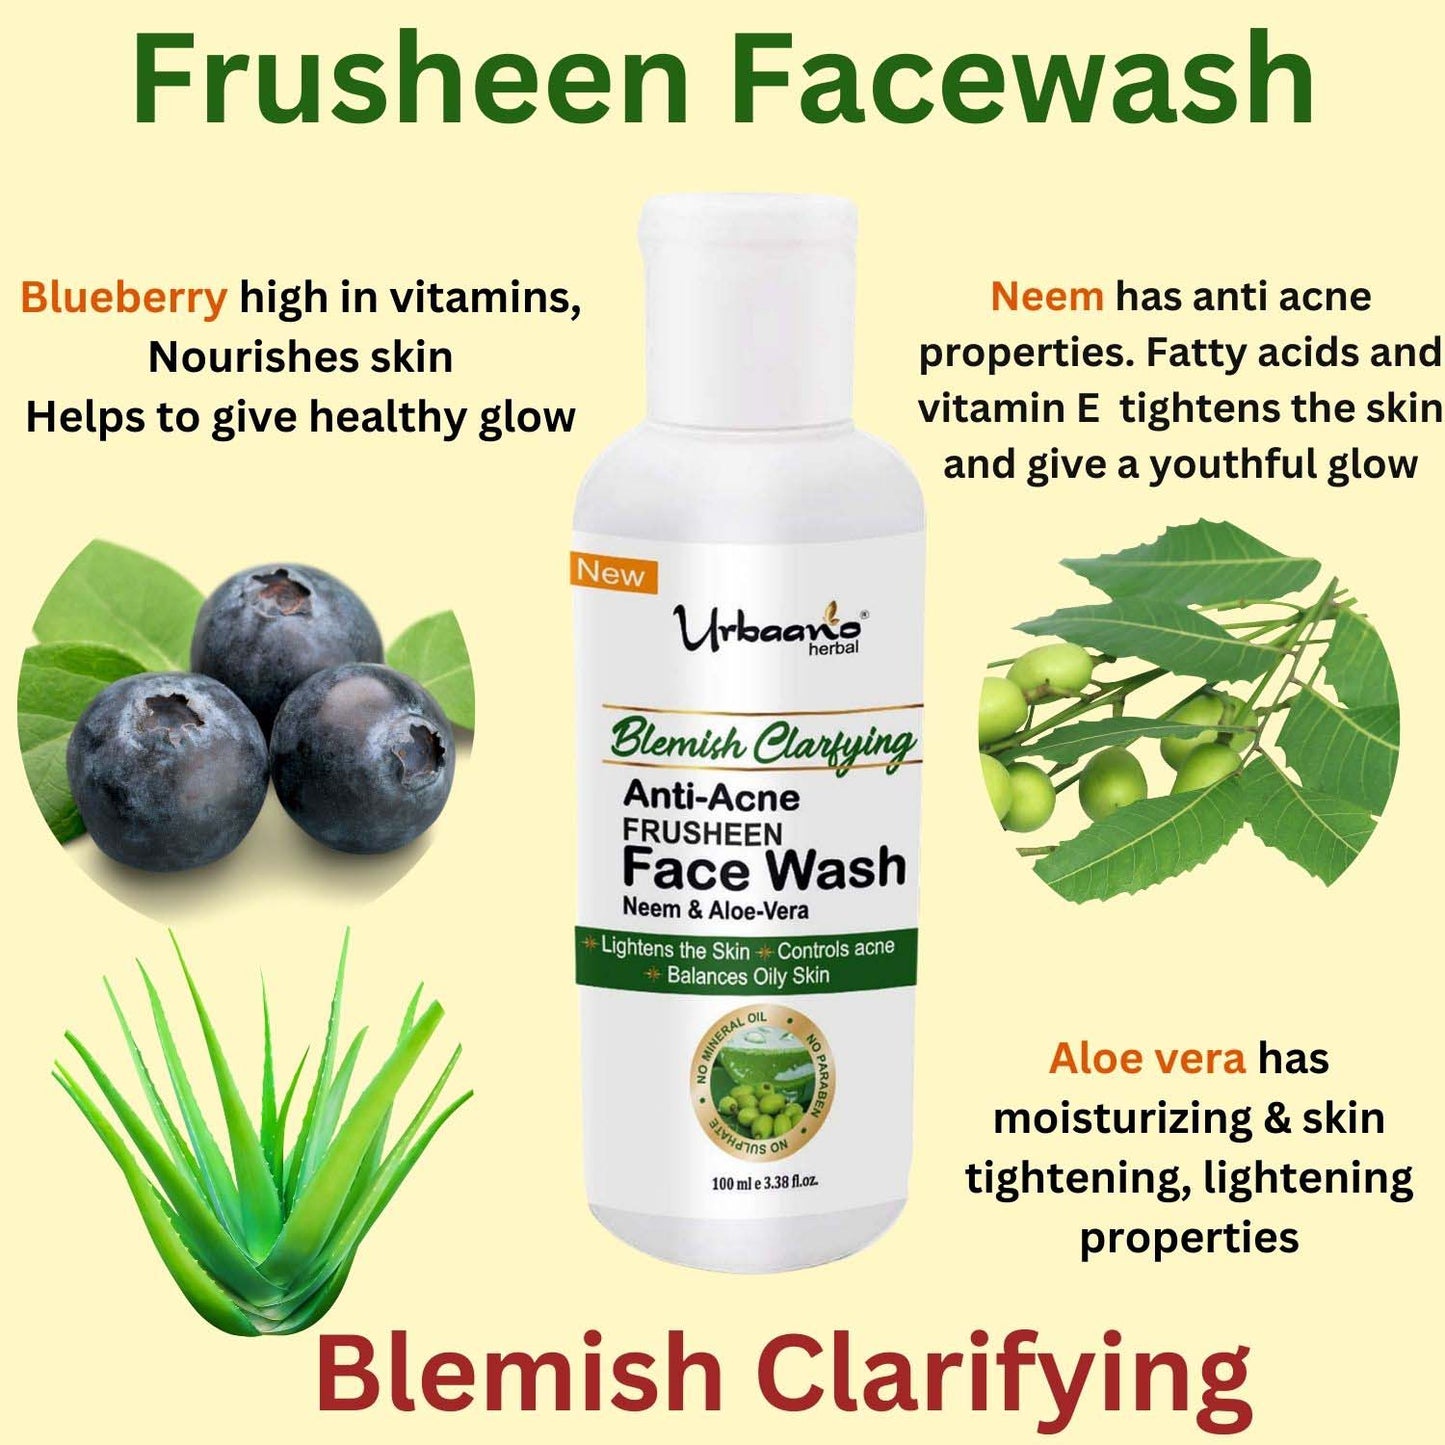 urbaano herbal frusheen neem, aloe vera face wash anti acne for skin brightening, reduce excess oil, germ, & for youthful, tight skin